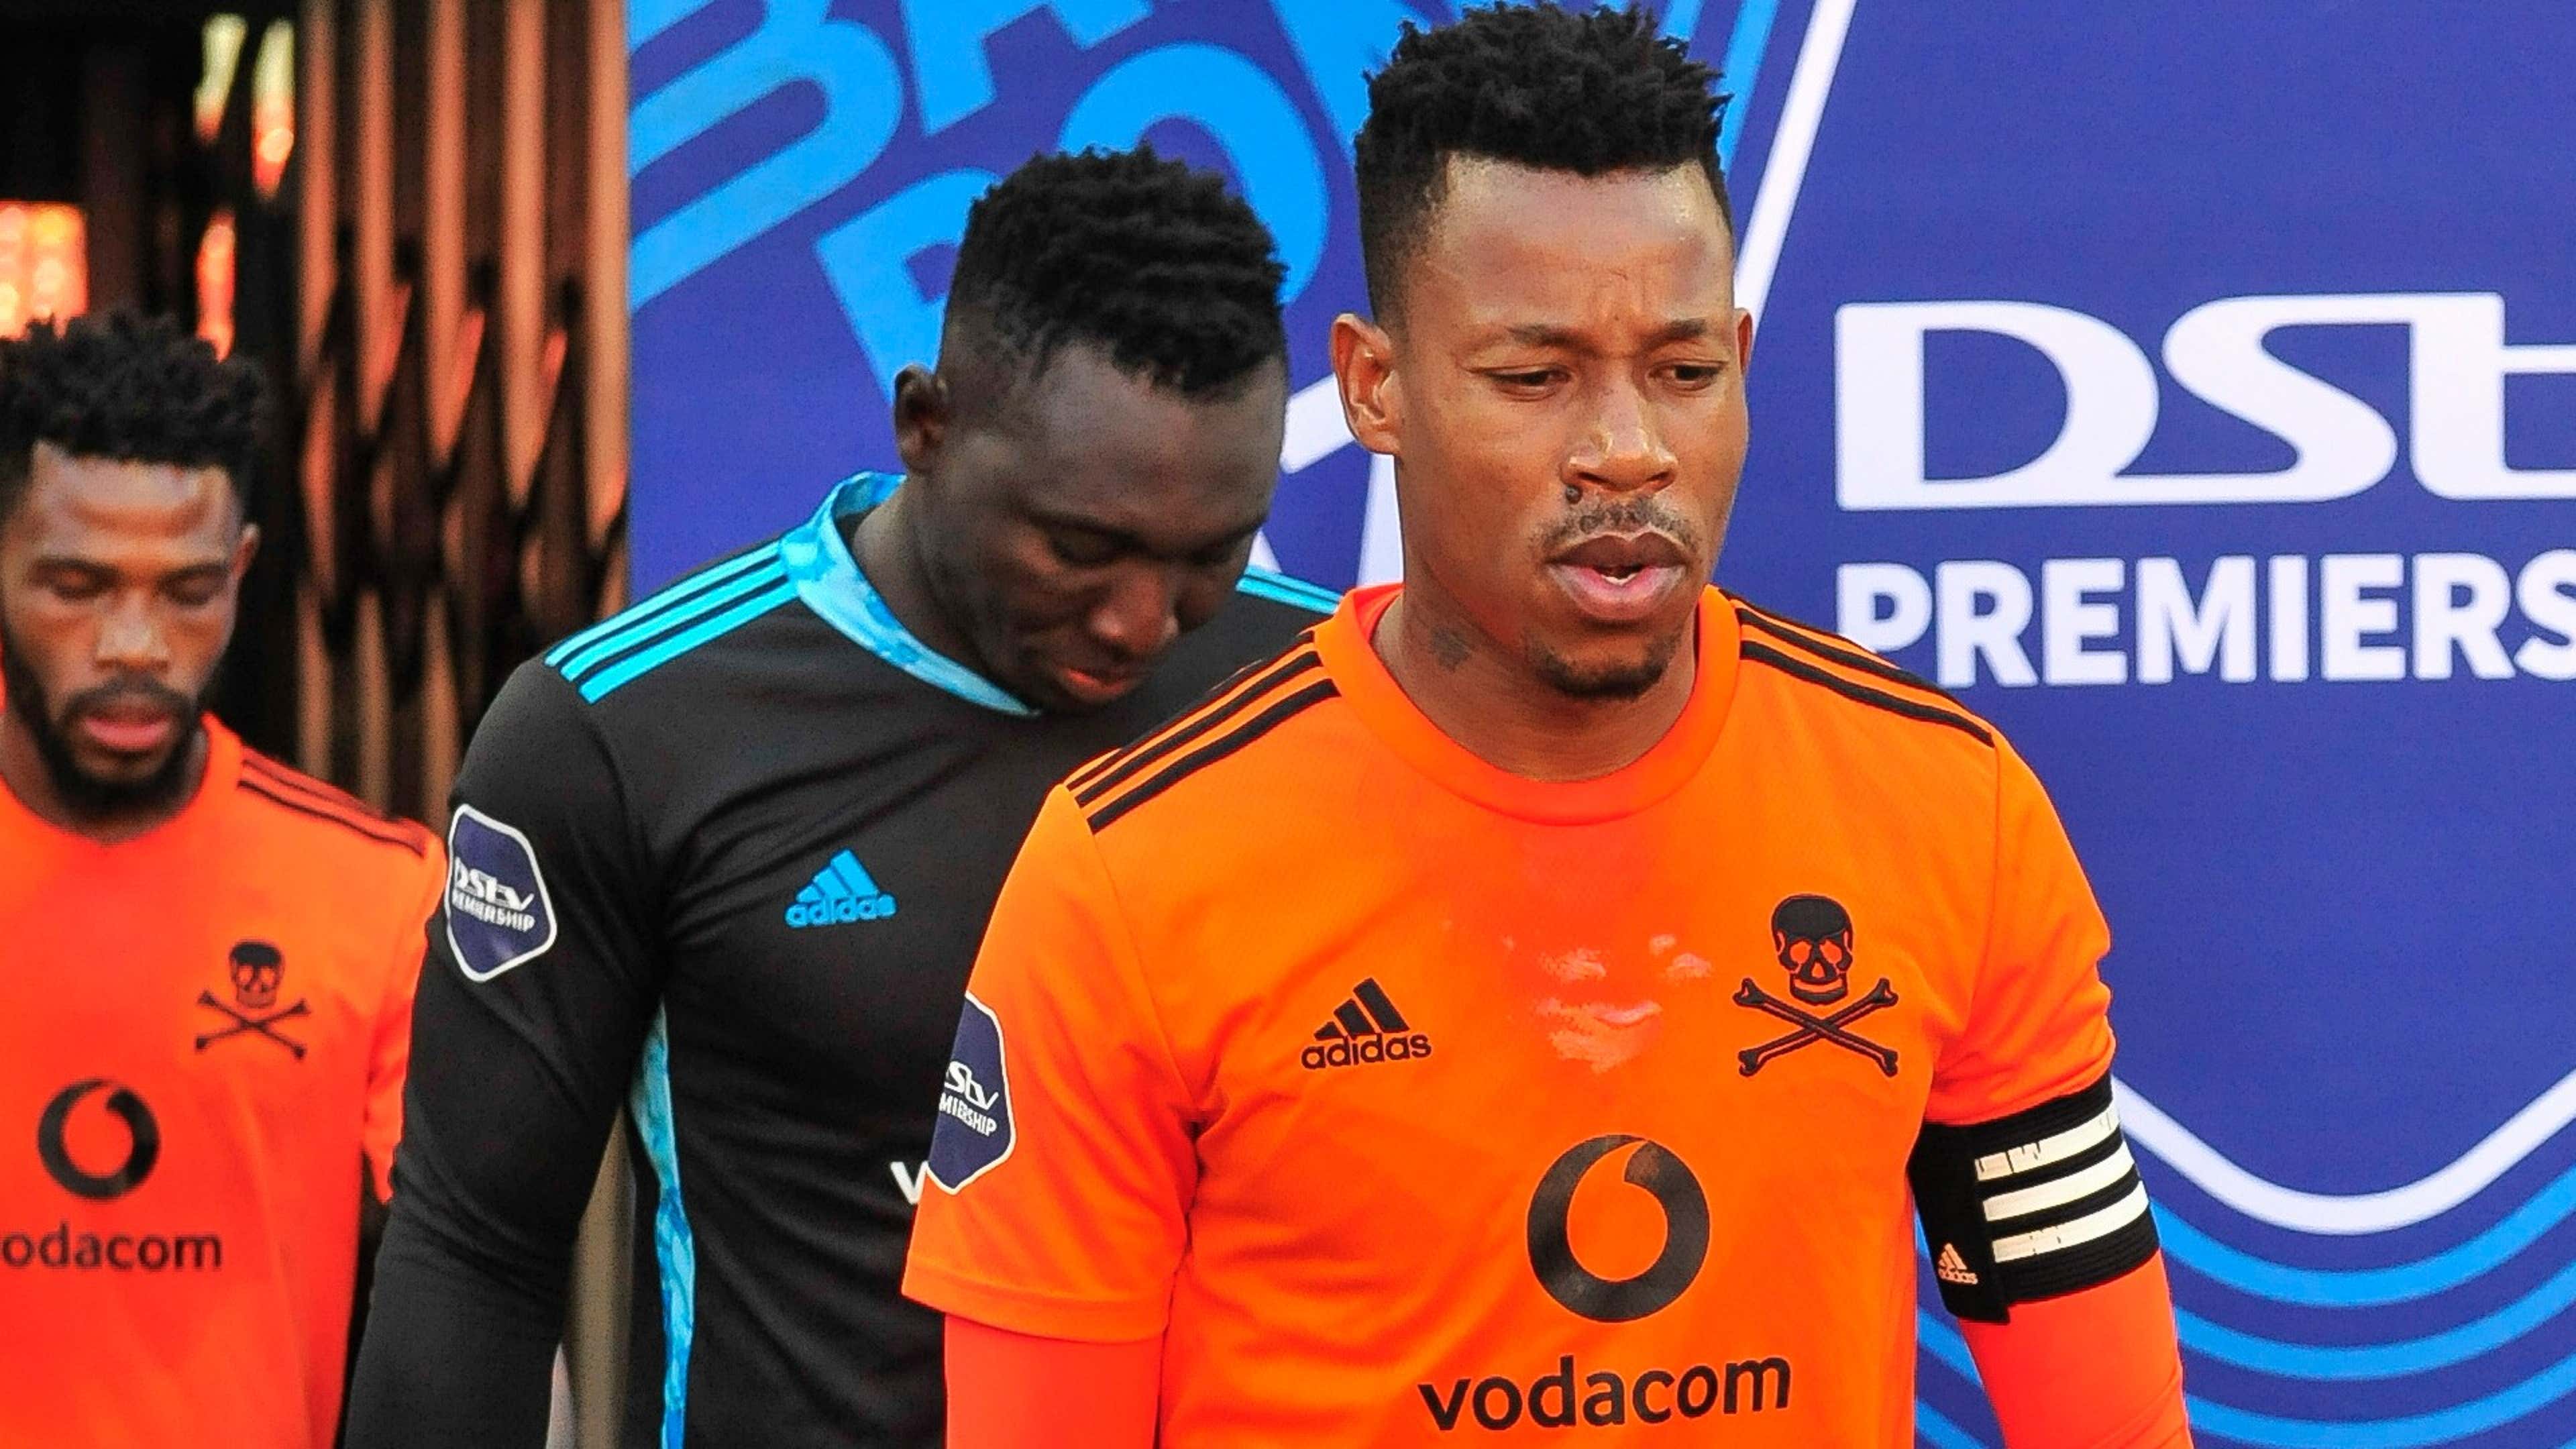 Vodacom - Stand a chance to WIN an Orlando Pirates jersey